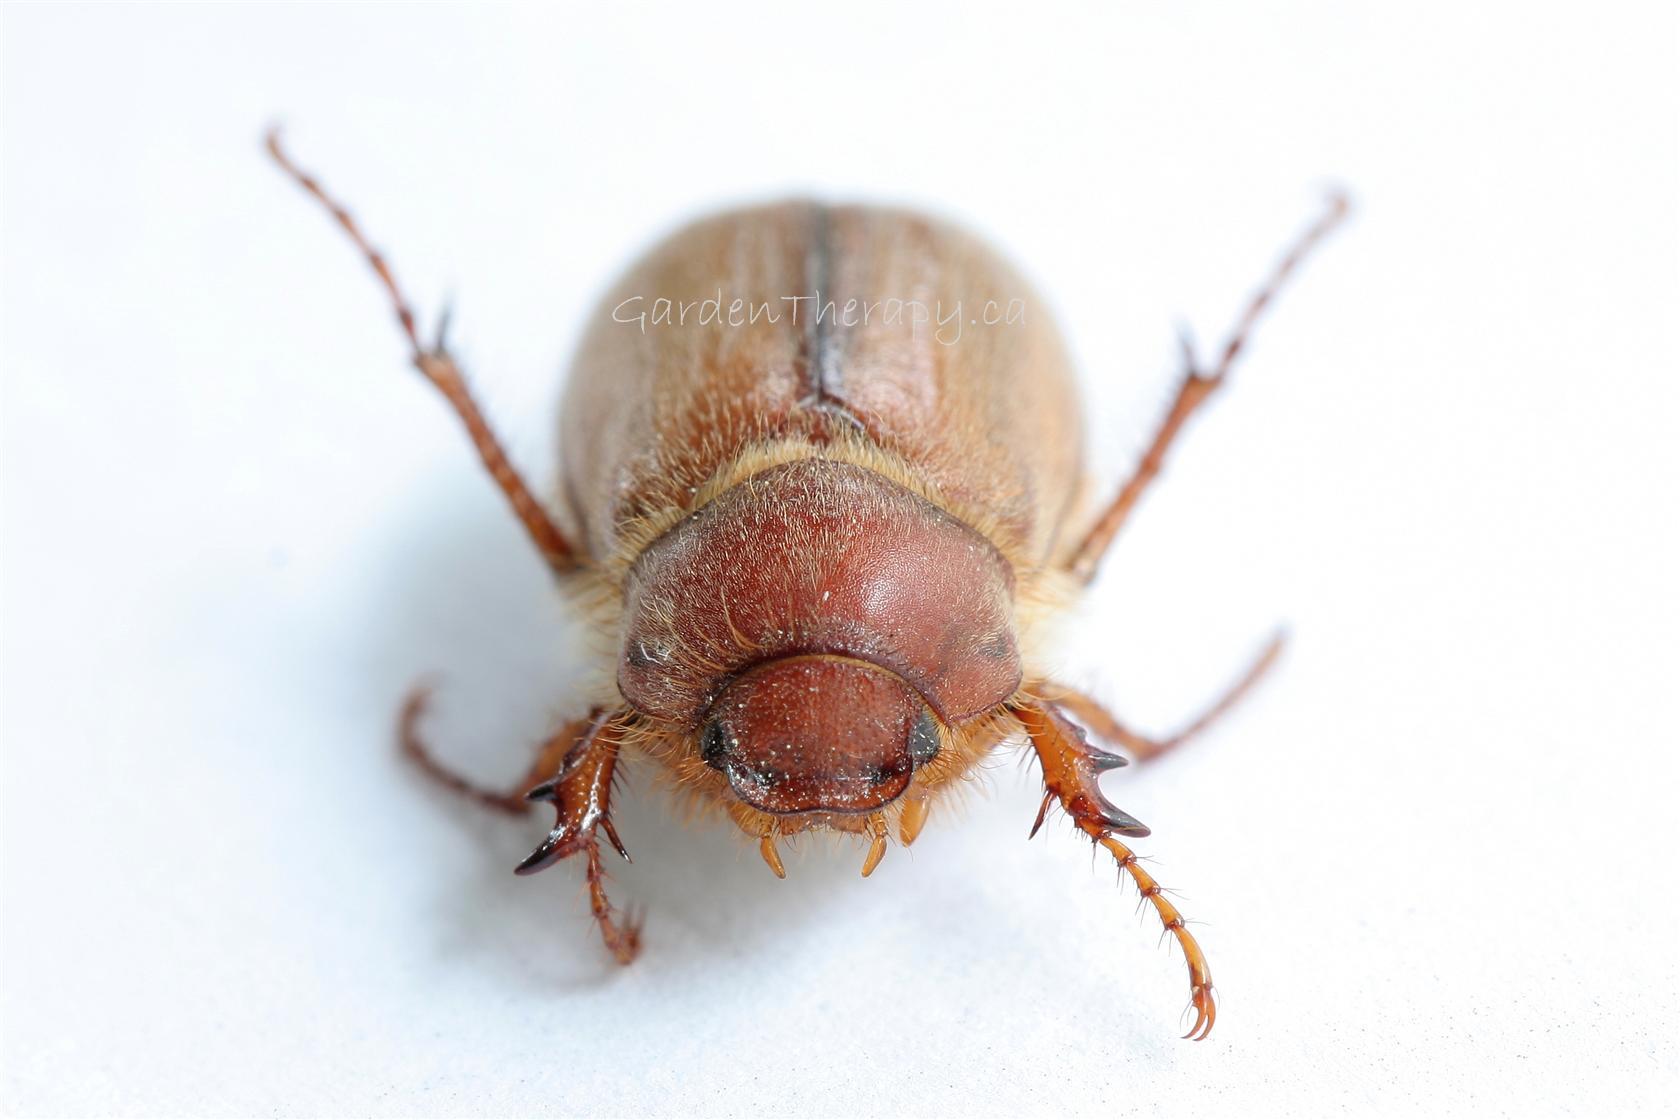 Up Close with the European Chafer Beetle